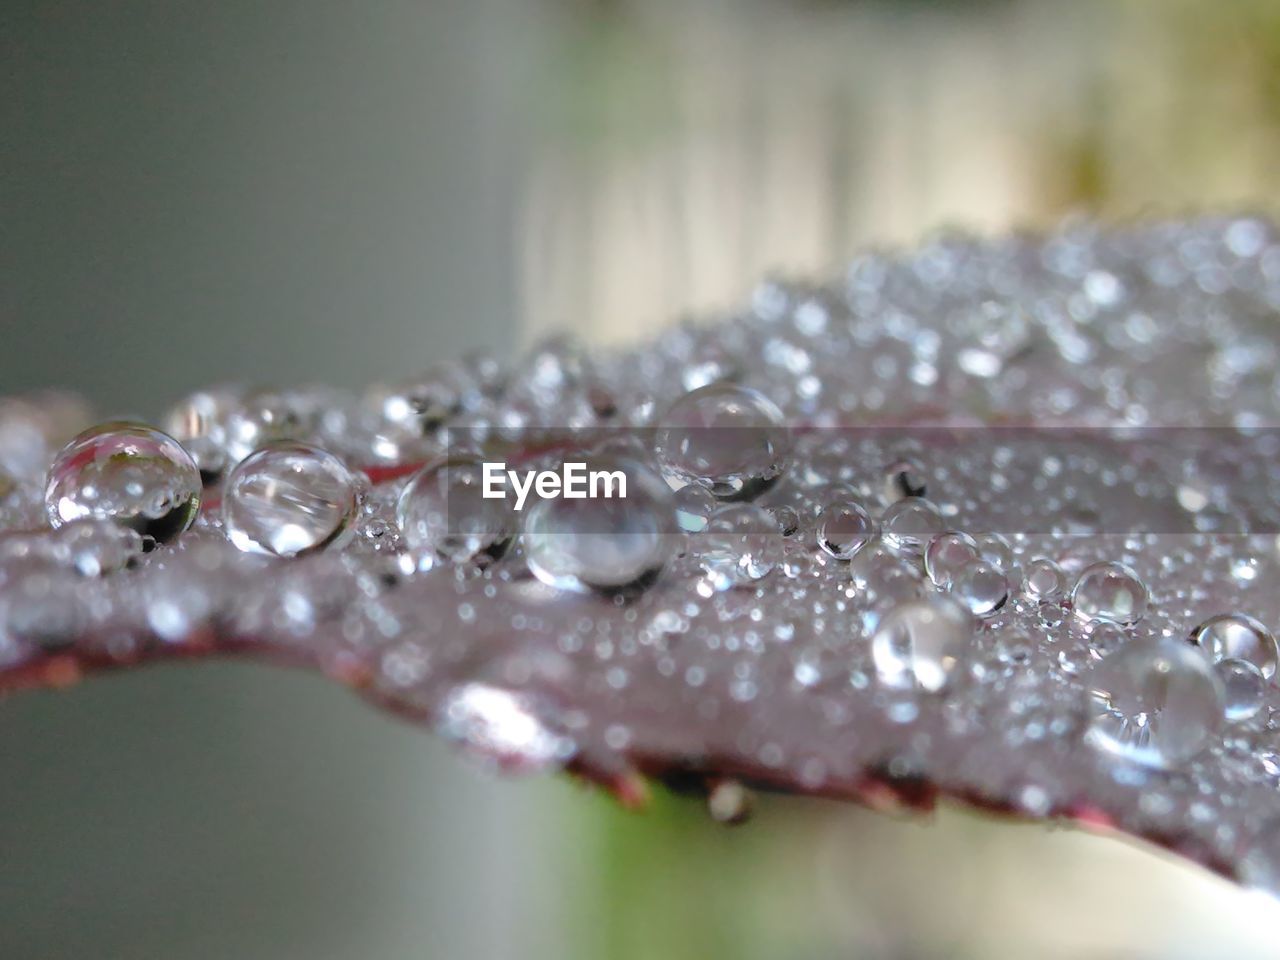 WATER DROPS ON LEAF